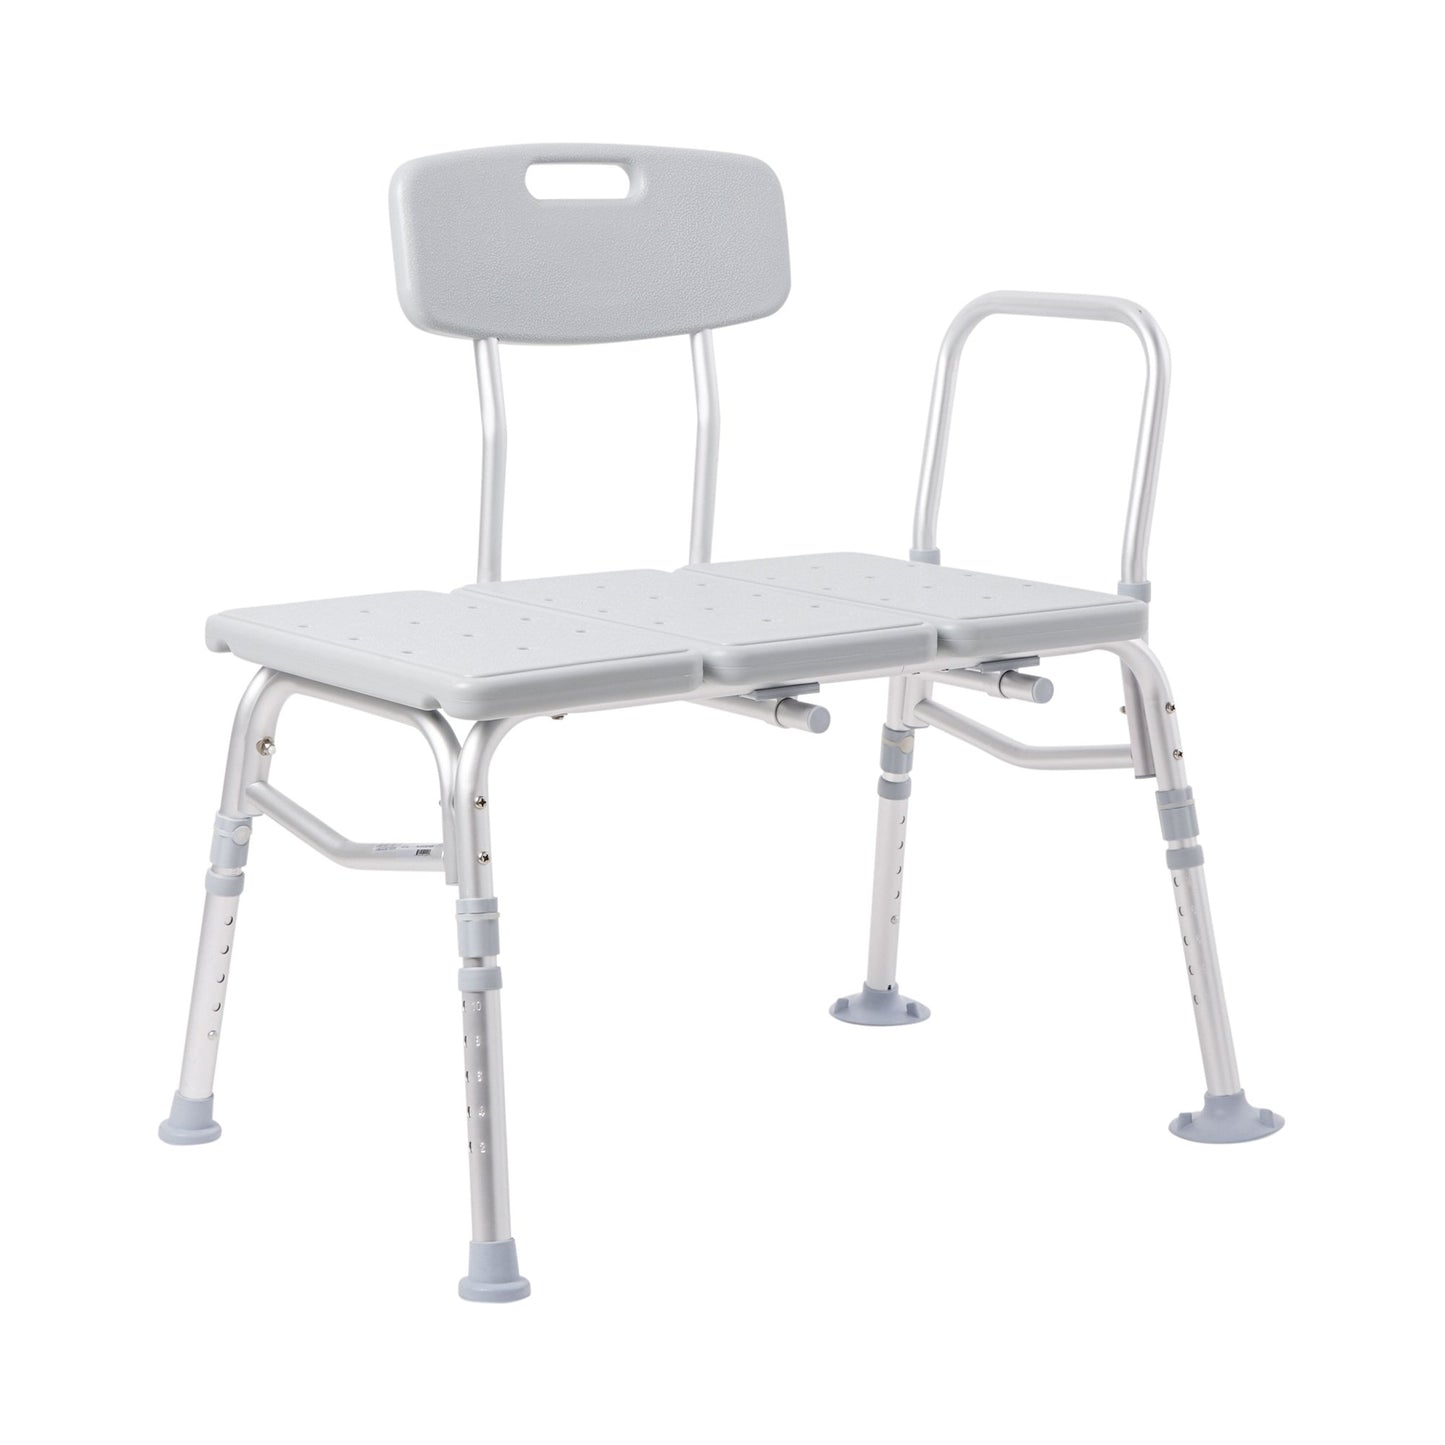 McKesson Aluminum Transfer Bench with Reversible Back